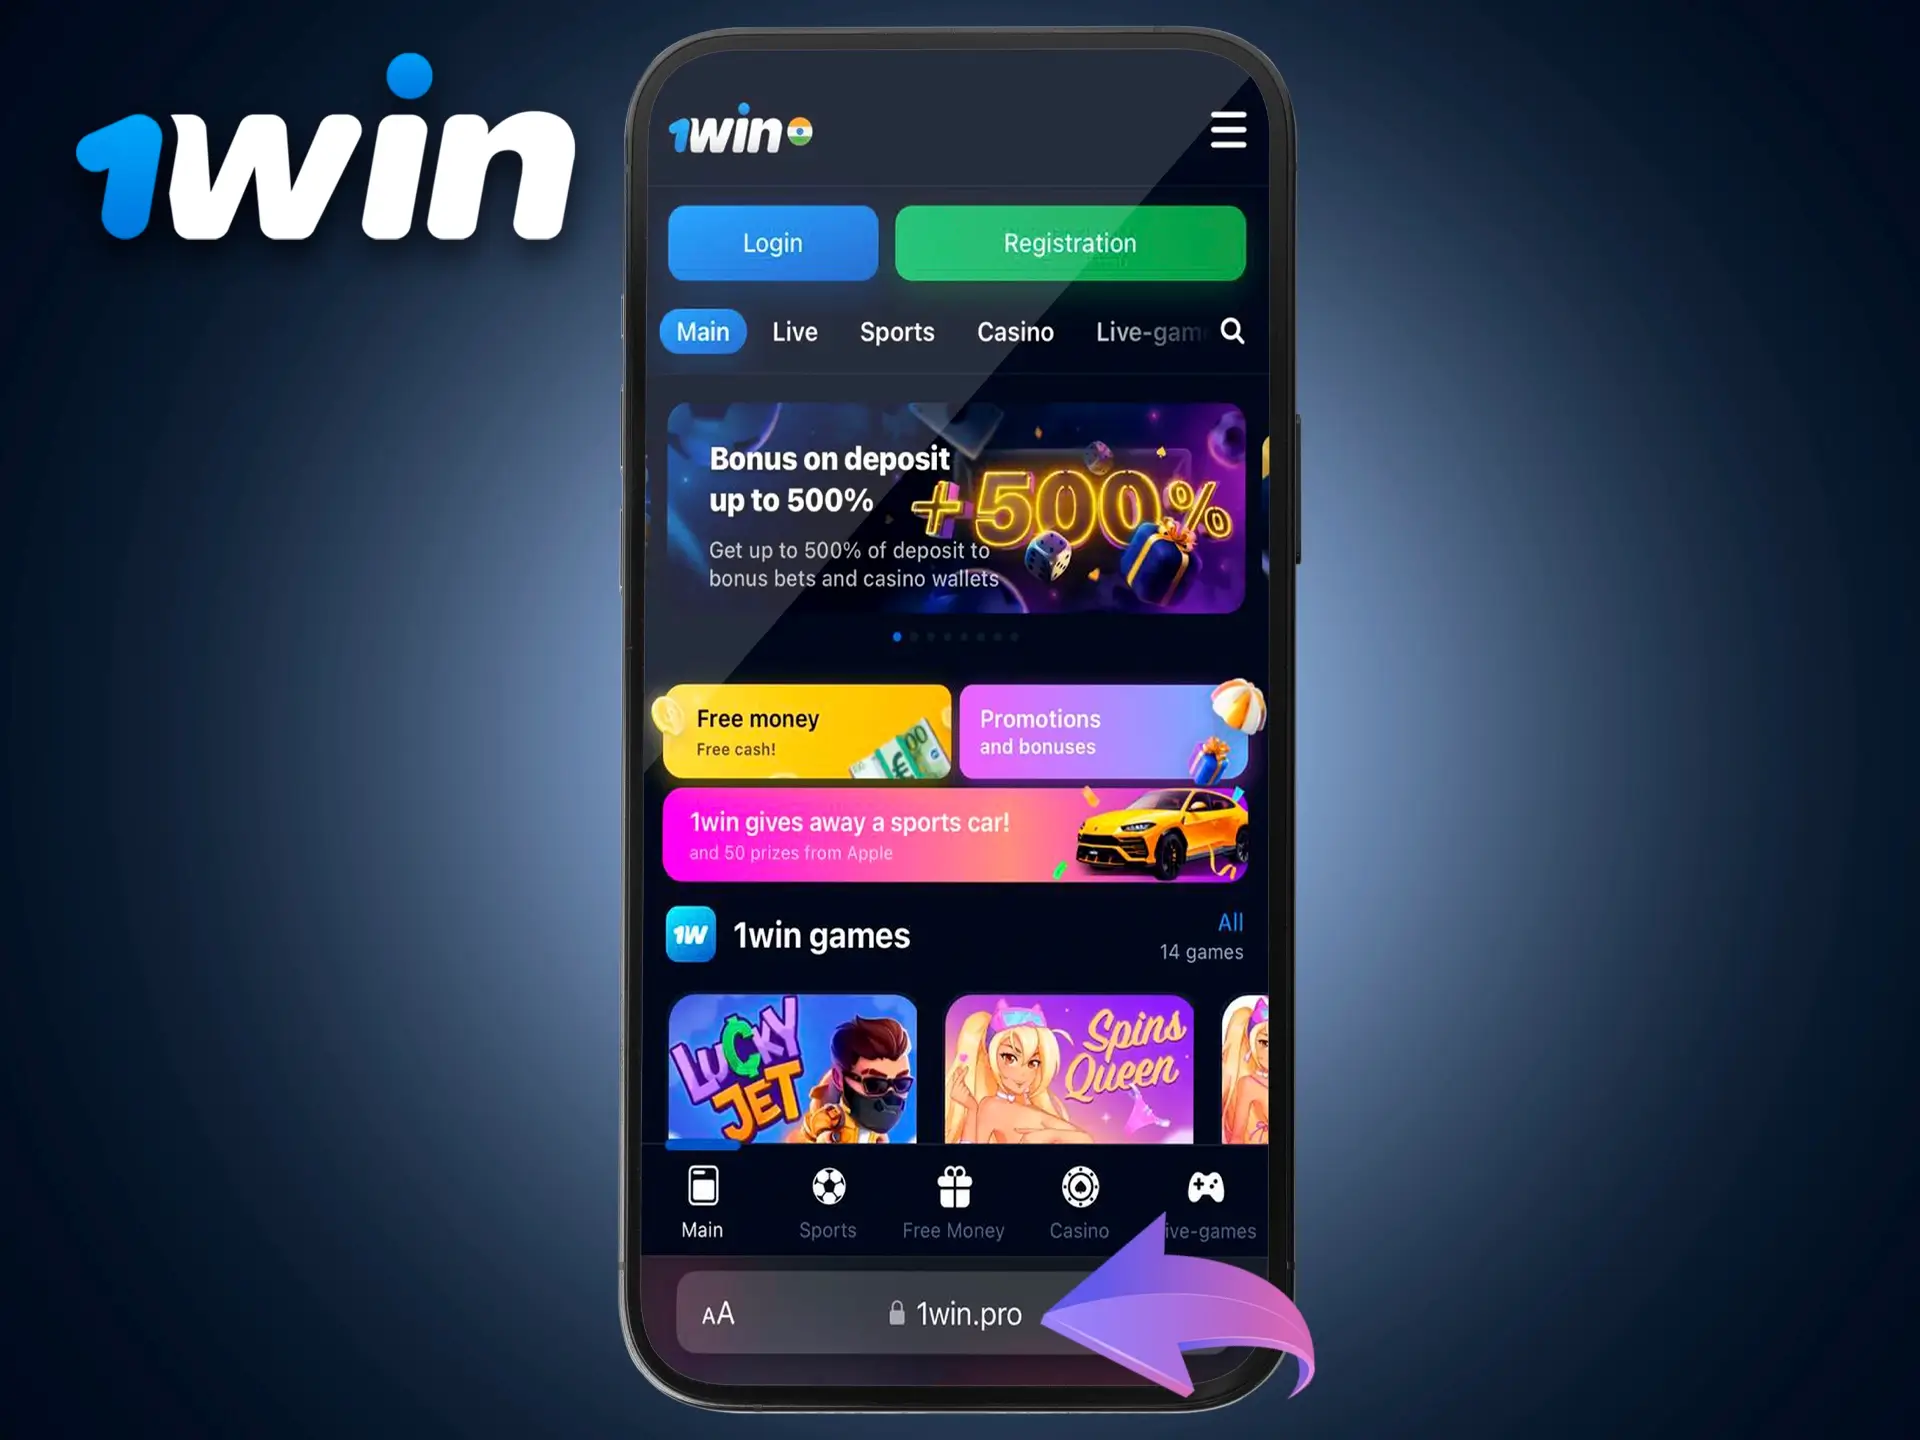 Enter the start page of the 1Win website in your browser.